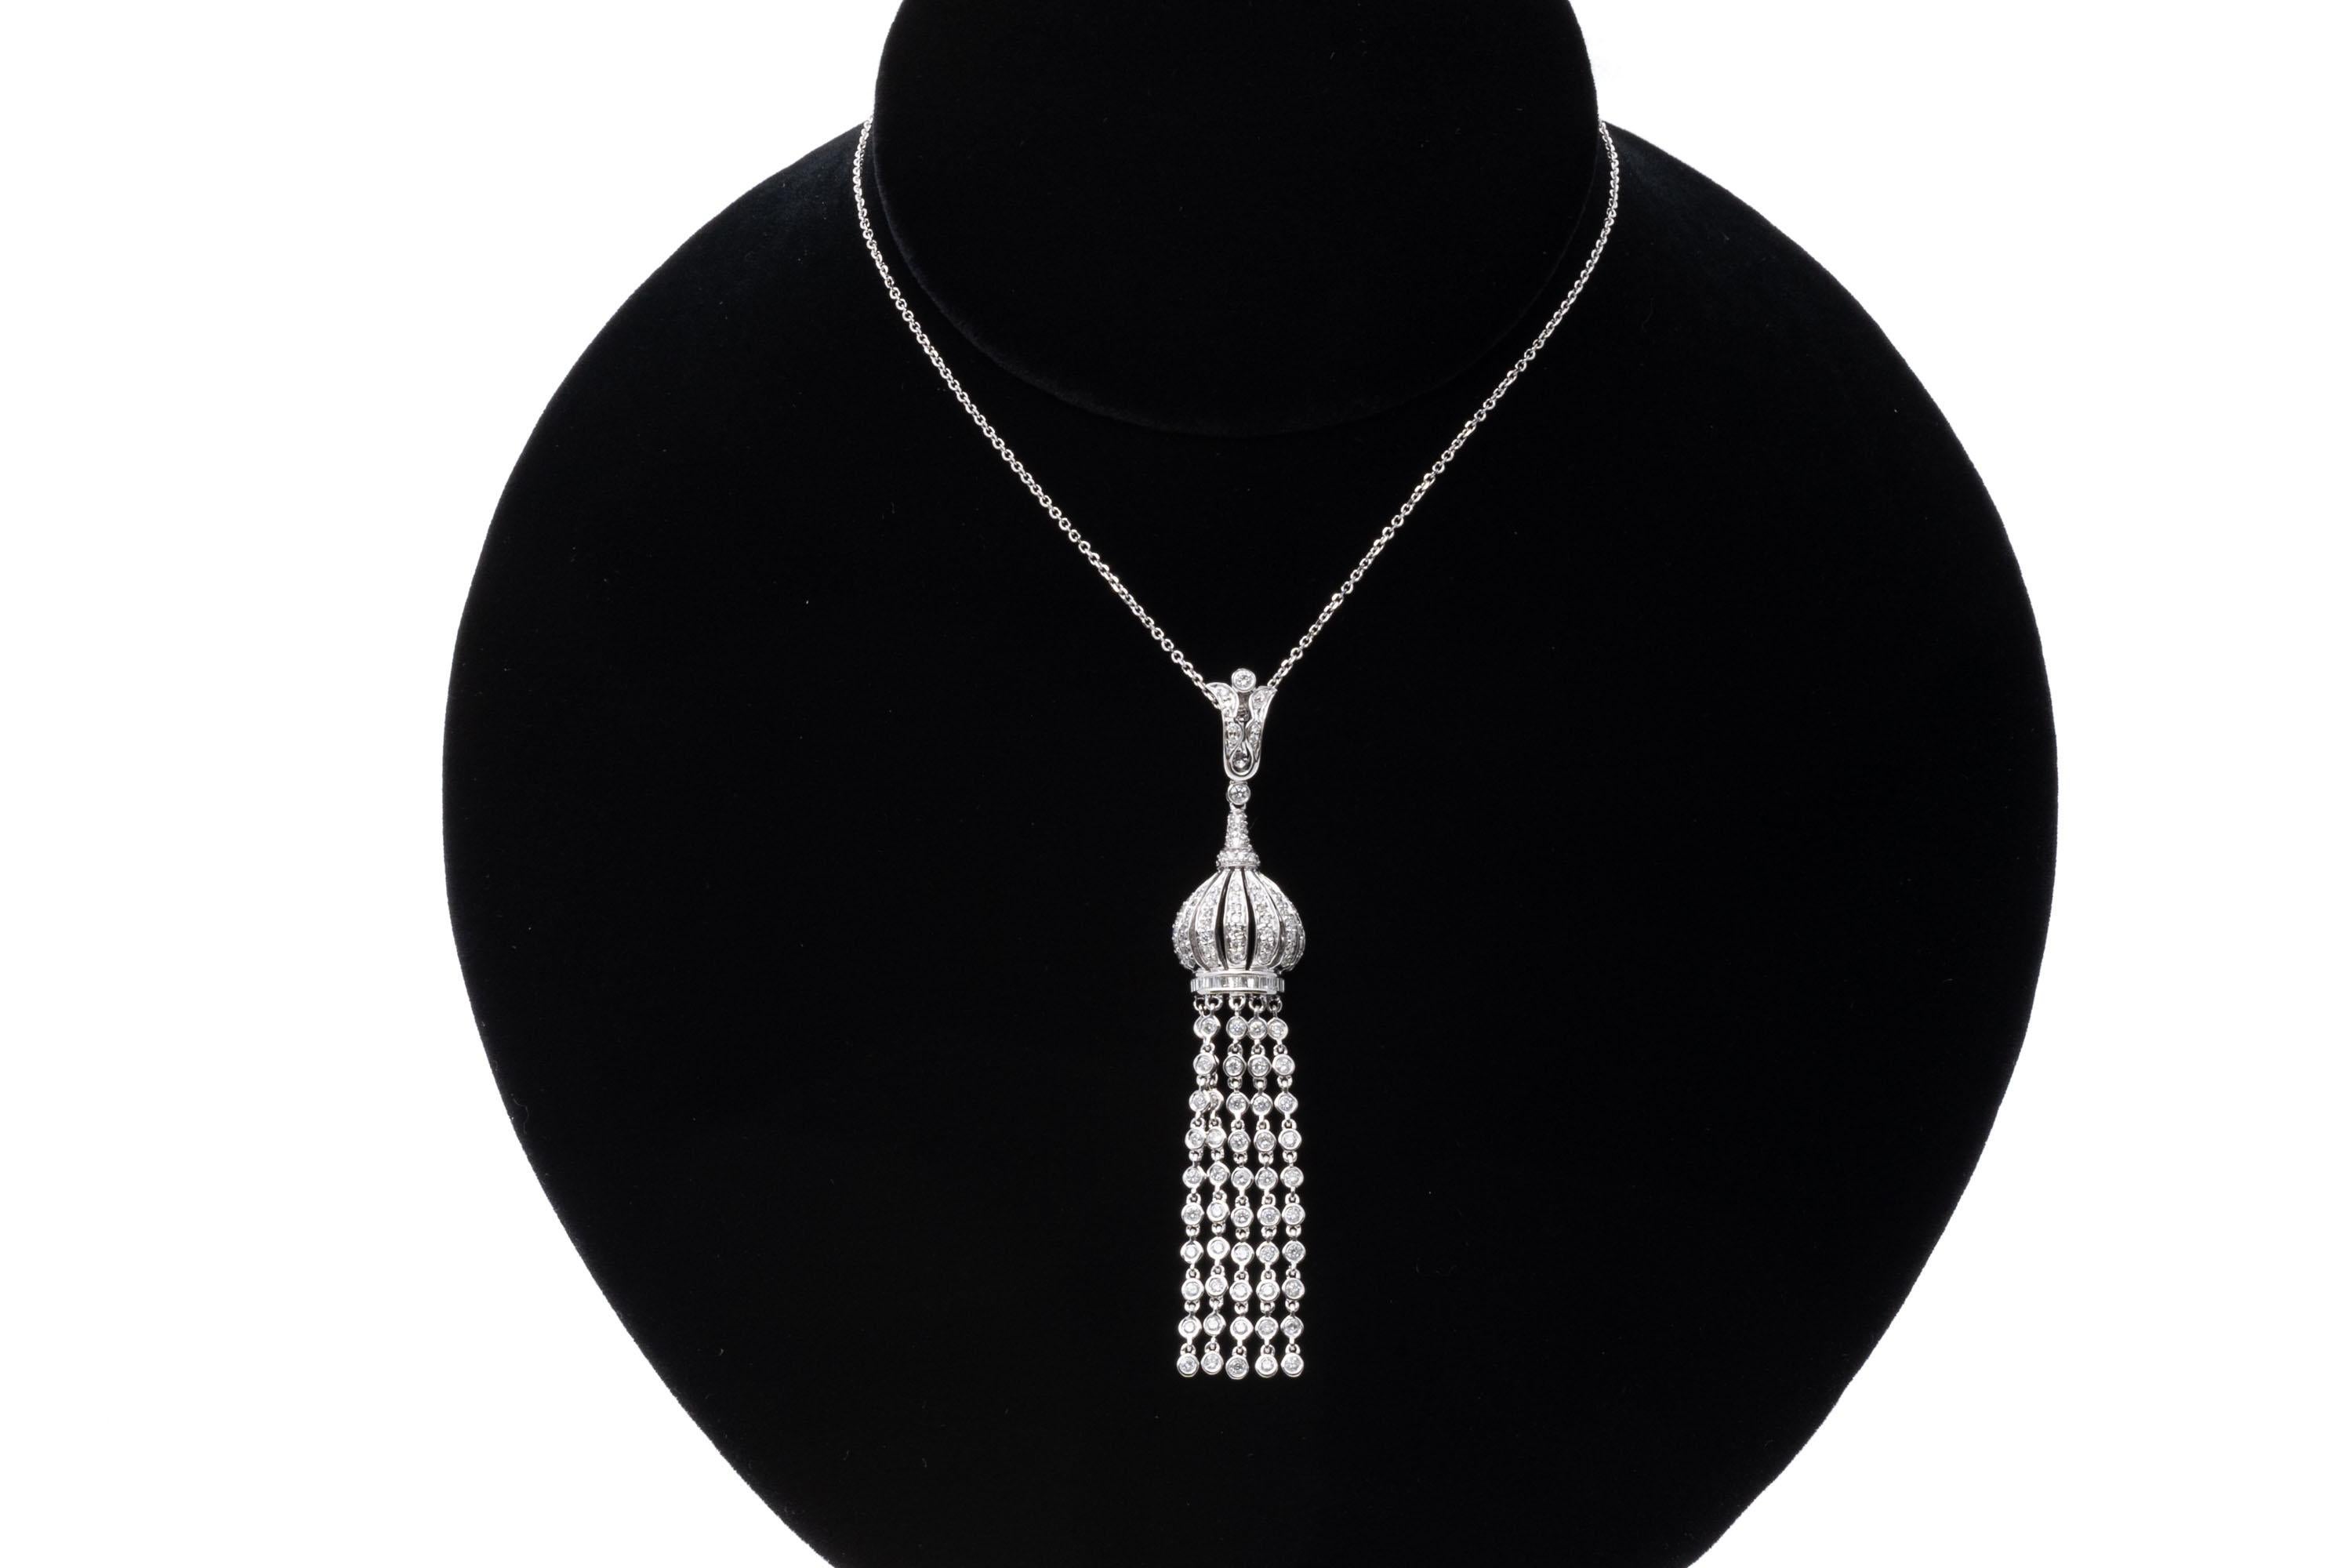 14K Diamond Tasseled Pendant Necklace, With Chain For Sale 4